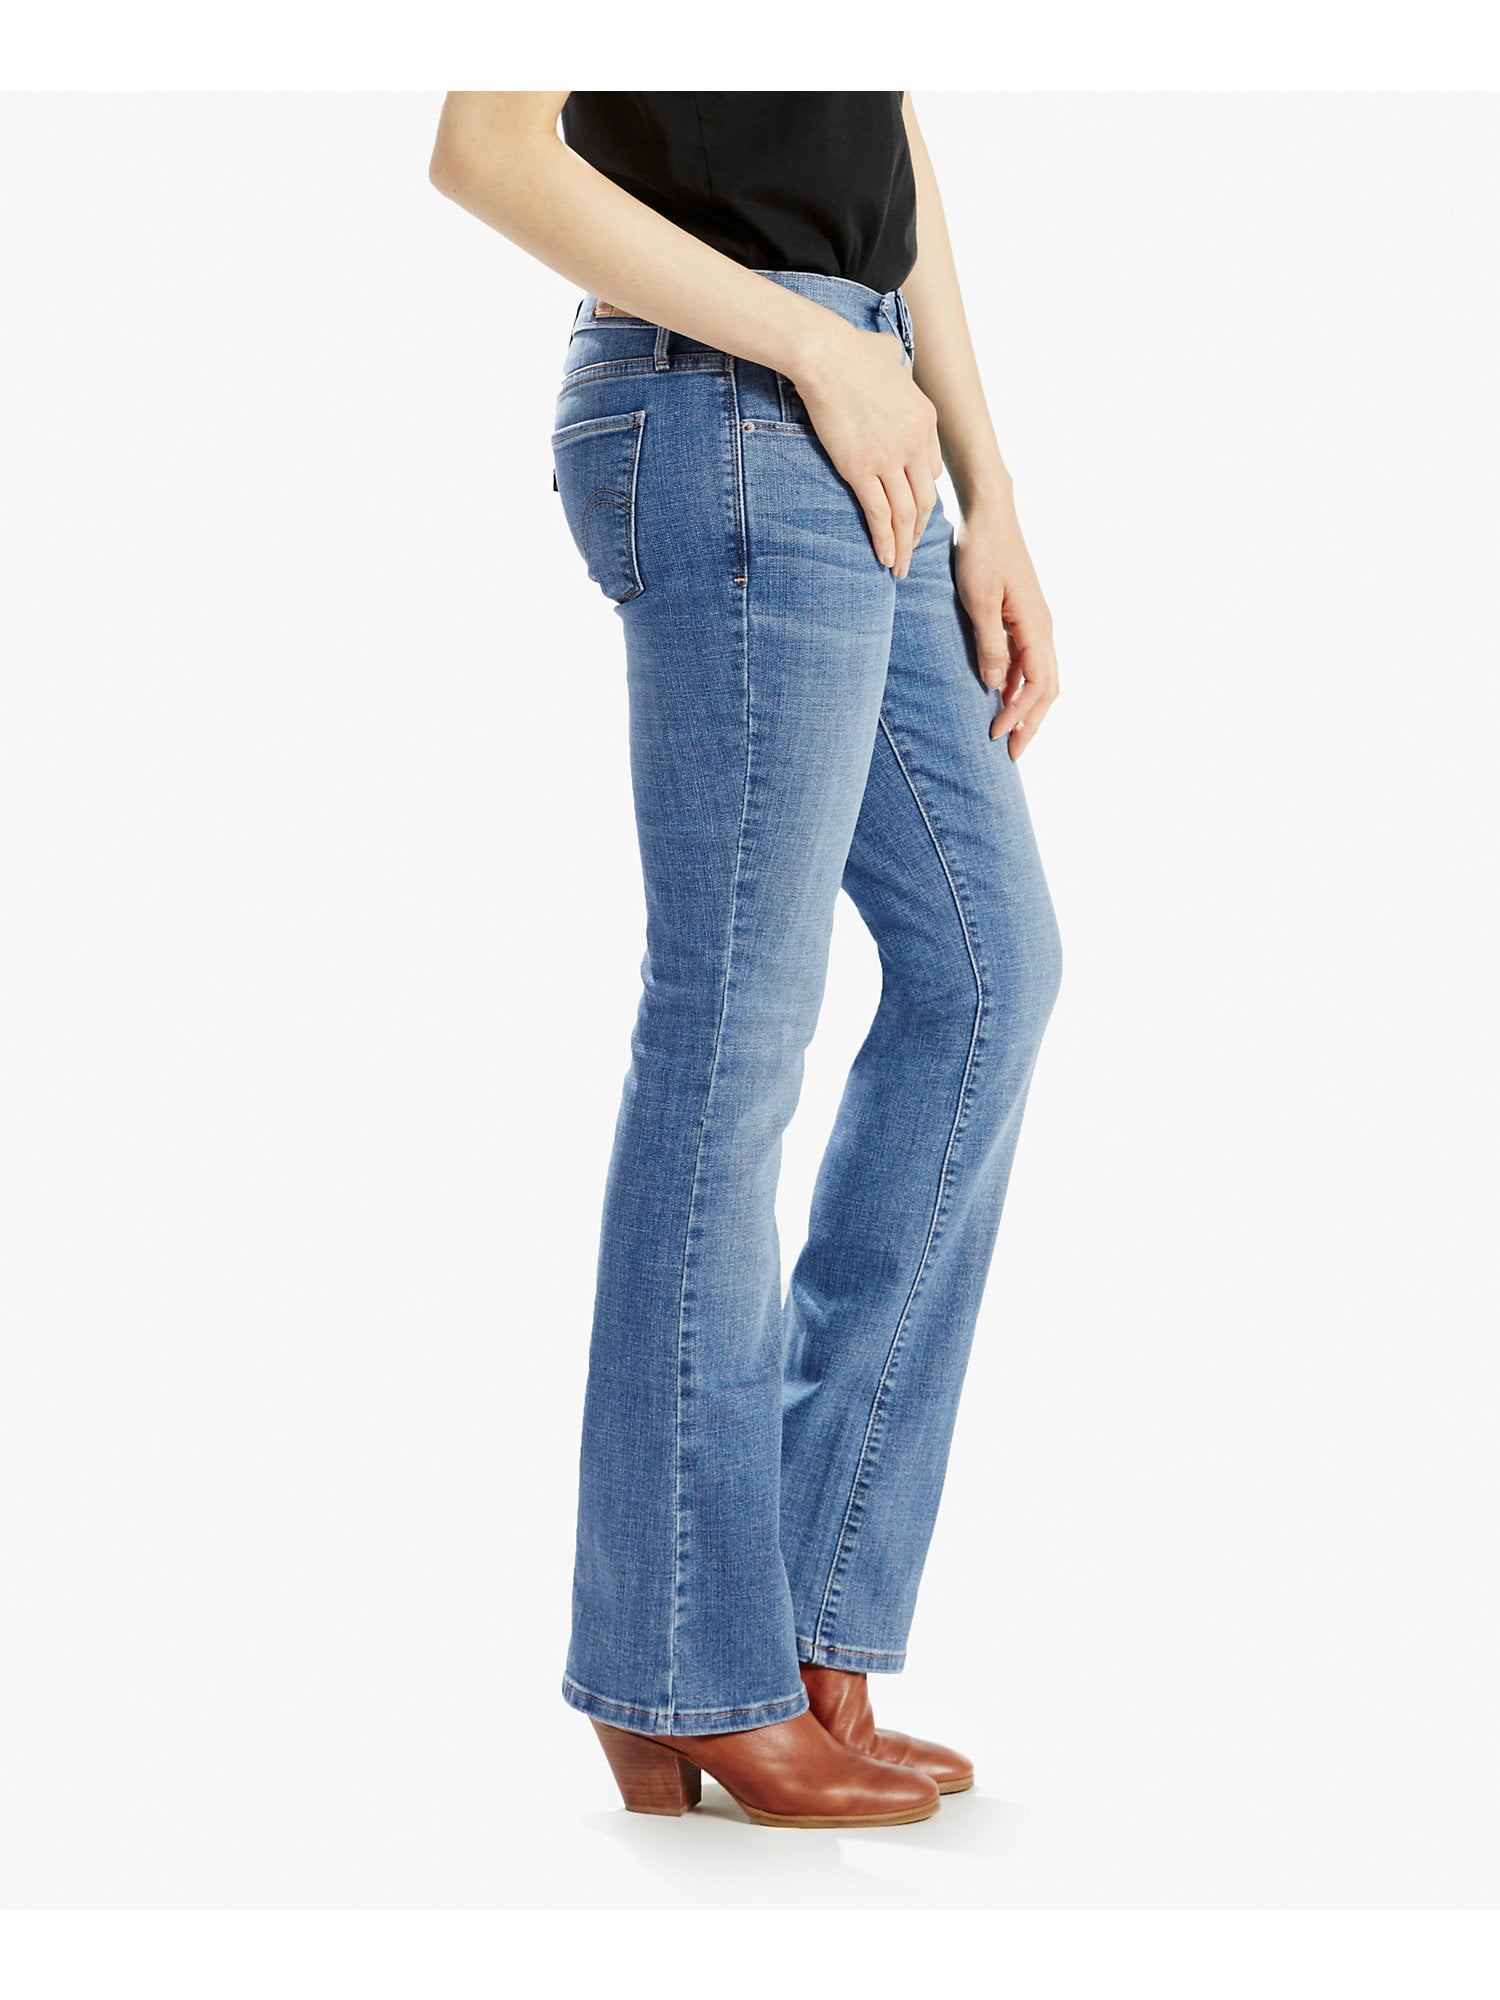 levi's womens bootcut 515 jeans